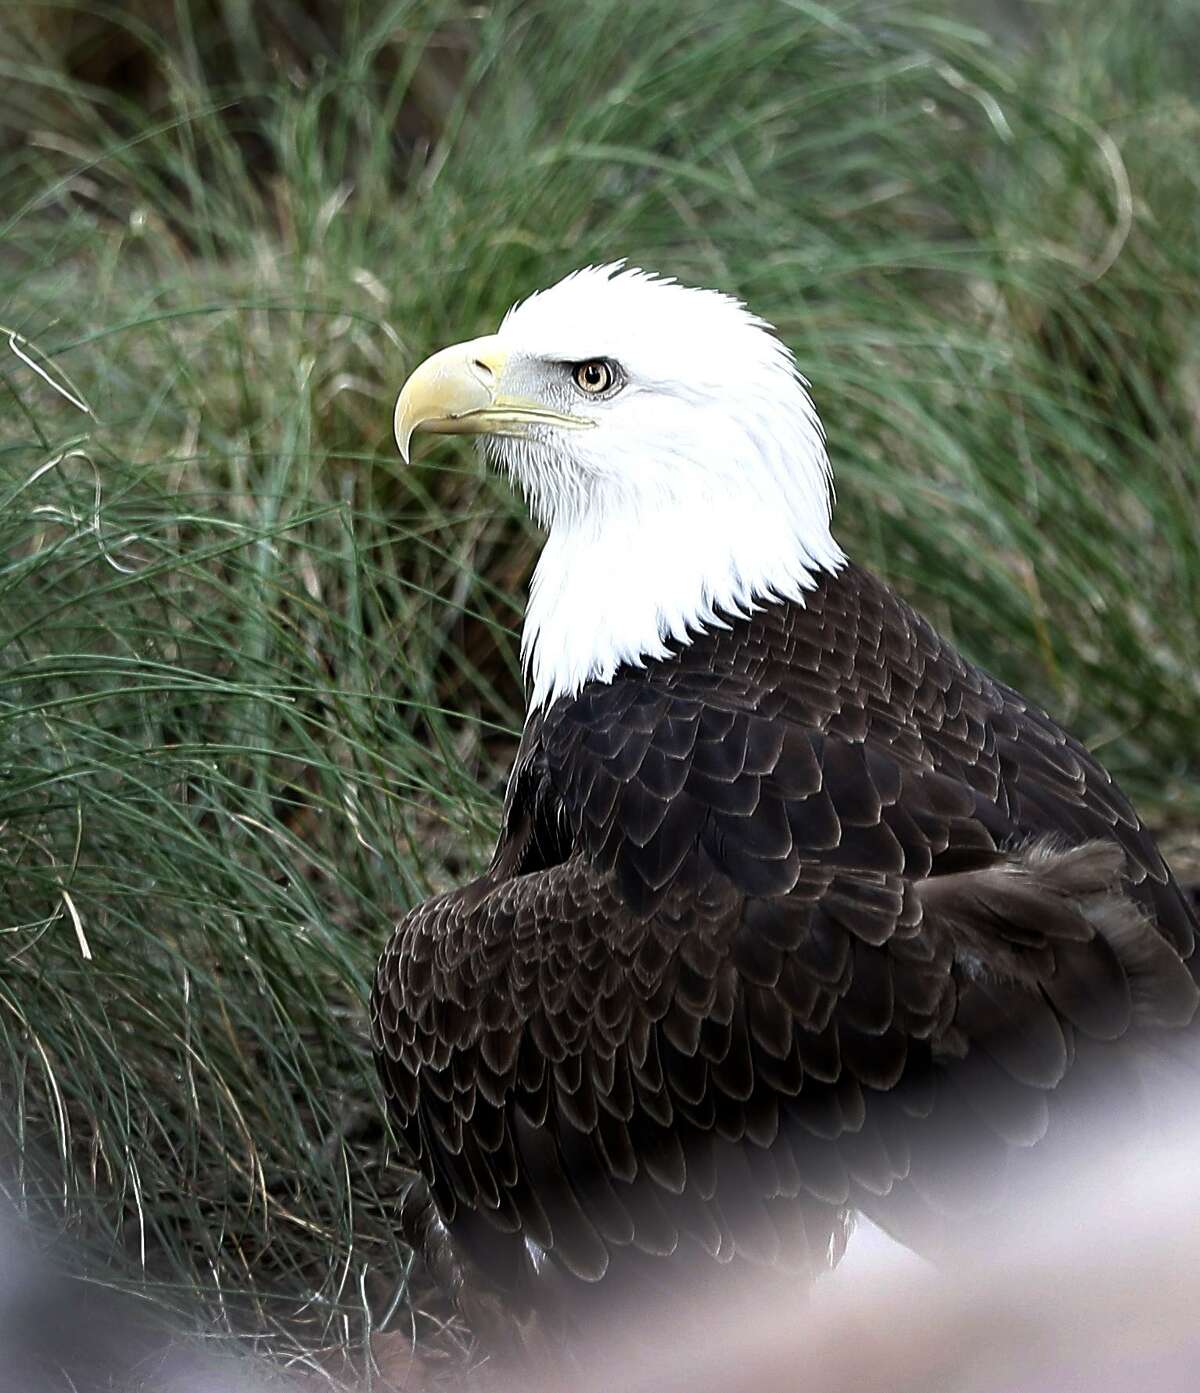 Sally Ride, a Bald Eagle, in her enclosure inside of the Houston Zoo's new Texas Wetlands exhibit, and brings together three native Texas species—bald eagles, whooping cranes, and American alligators—in a lush wetland habitat, in Houston, Tuesday, May 21, 2019. The Endangered Species Act and the efforts of Texans have helped those species — once close to extinction — thrive in the Lone Star State.